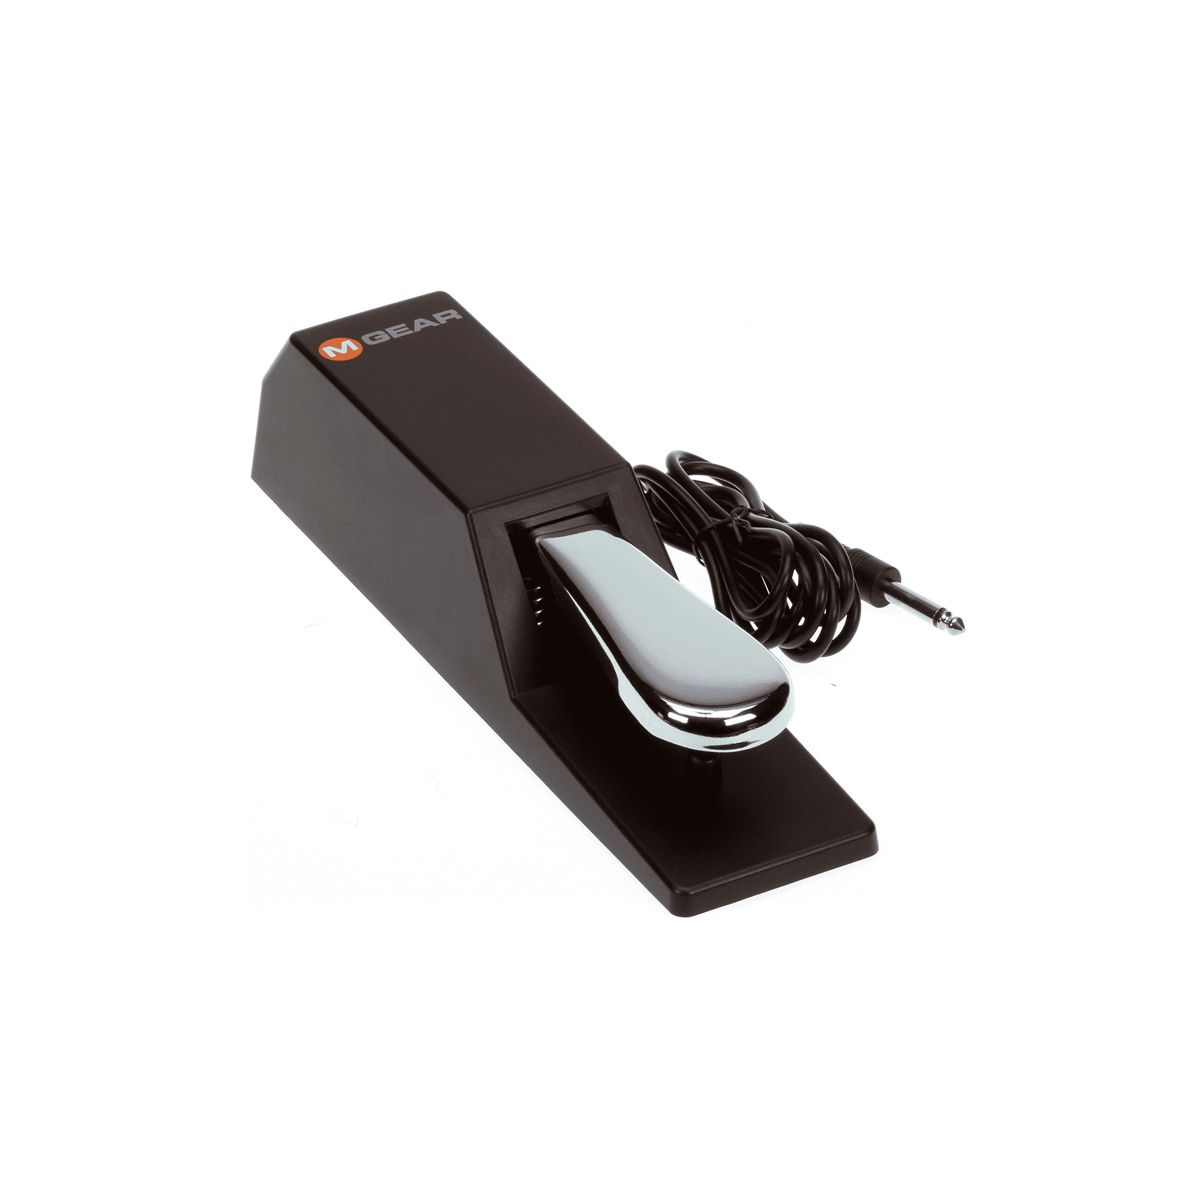 USED M-Audio SP-2 Sustain Pedal - admin ajax.php?action=kernel&p=image&src=%7B%22file%22%3A%22wp content%2Fuploads%2F2020%2F05%2FMAudio SP2 STOCK